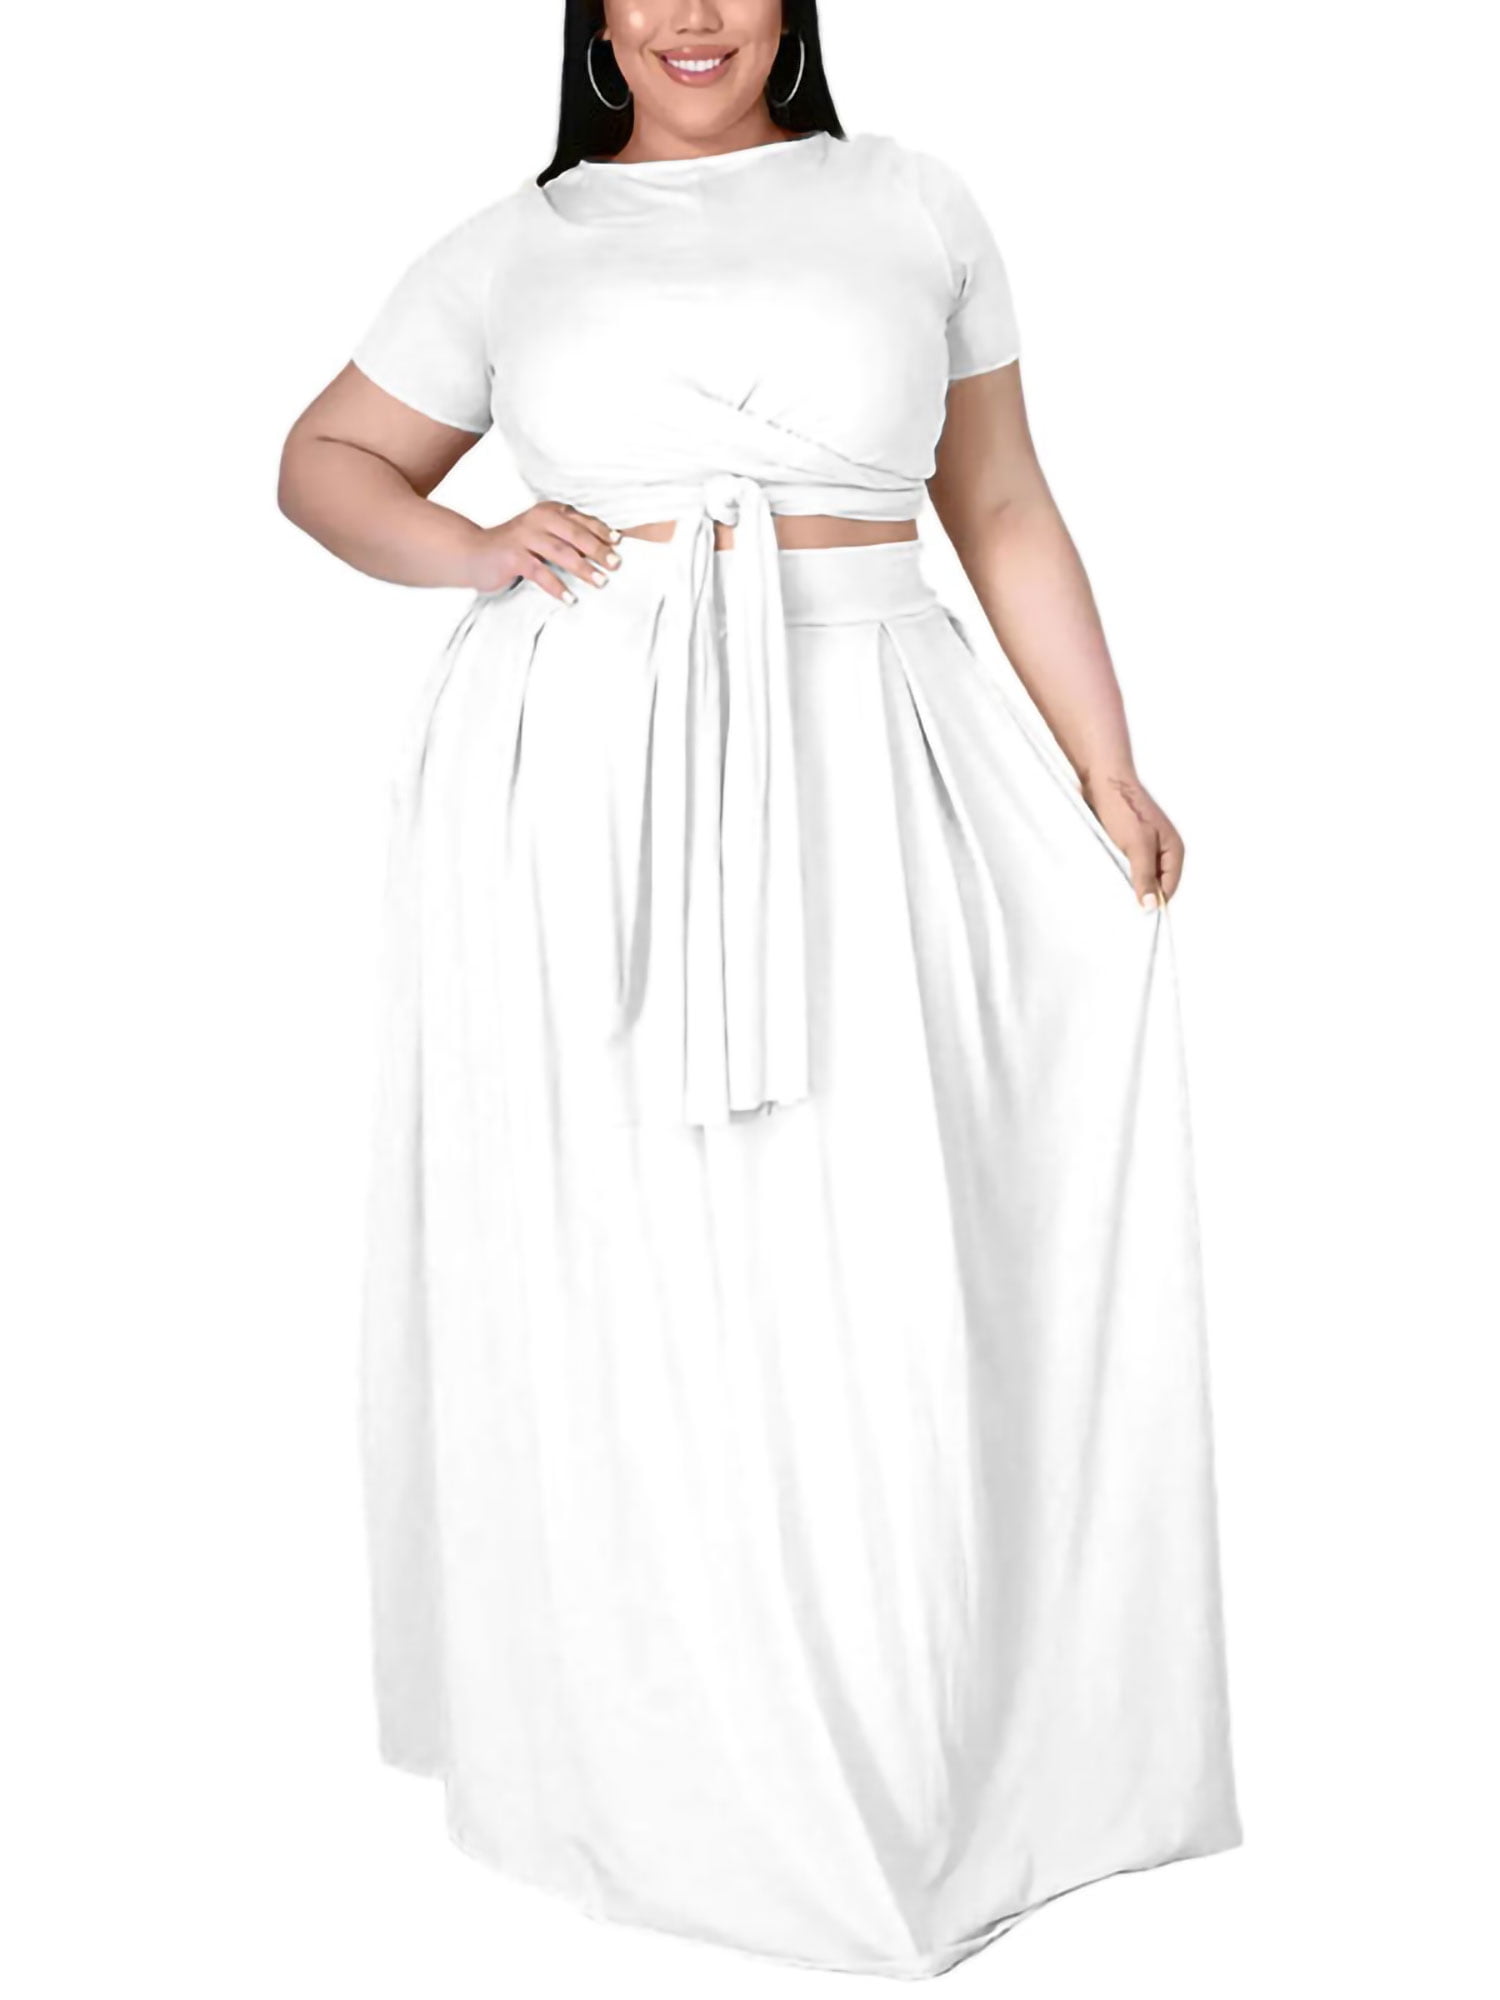 Colisha Plus Size Workout Sets for Women 2 Piece Short Sleeve Tie Up Top  and Maxi Long Skirt Set for Club Party Dress 